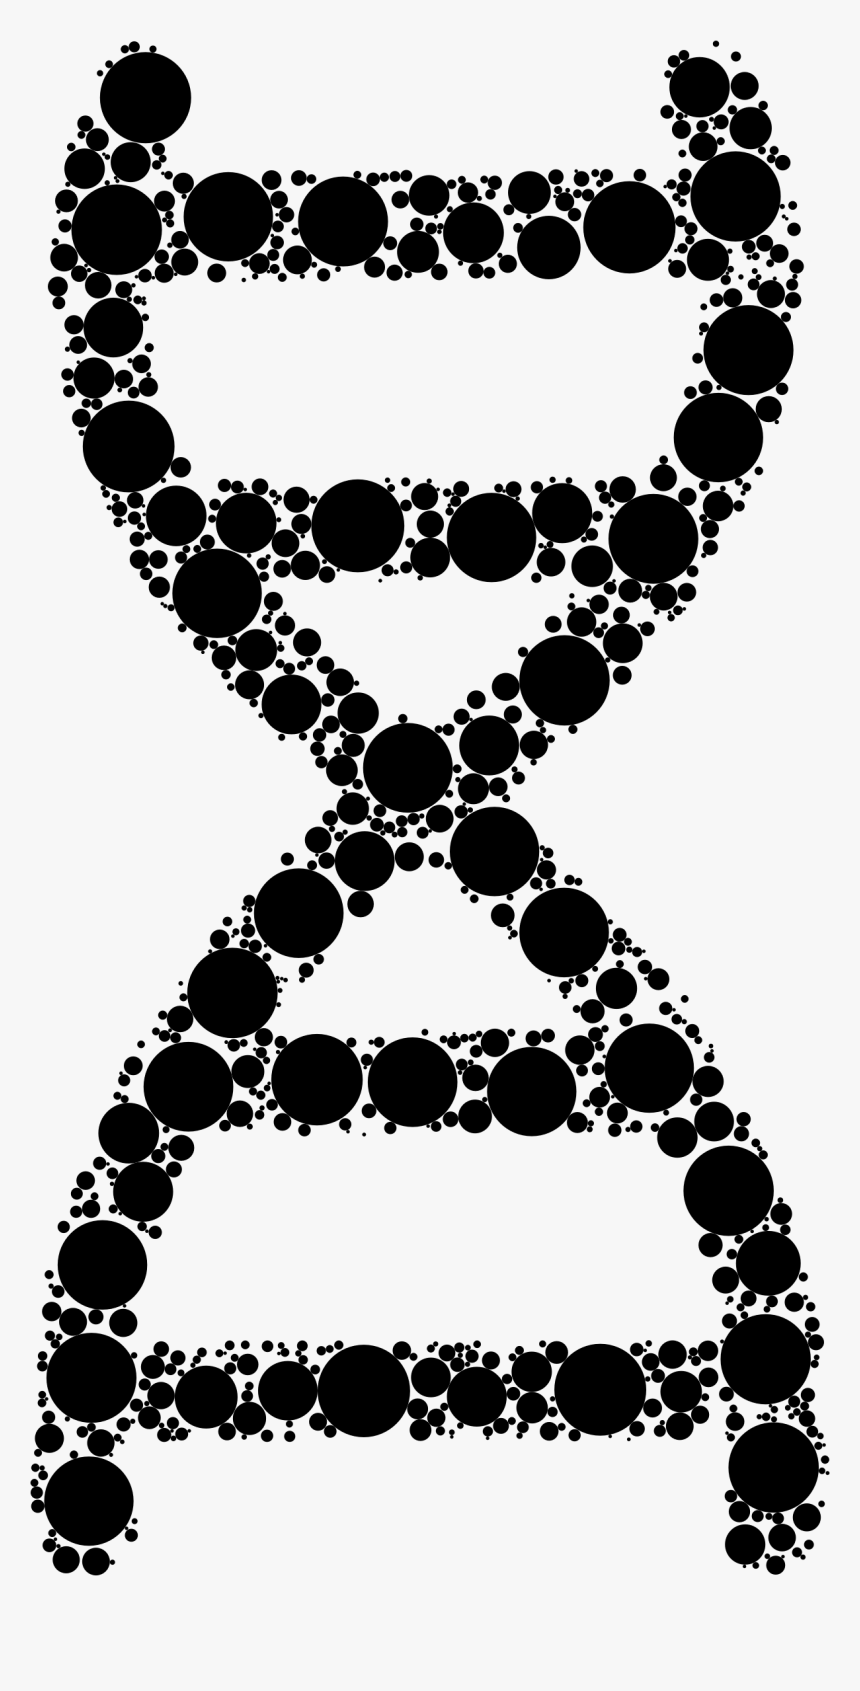 This Free Icons Png Design Of Dna Helix Circles - Nucleic Acid In A Human, Transparent Png, Free Download